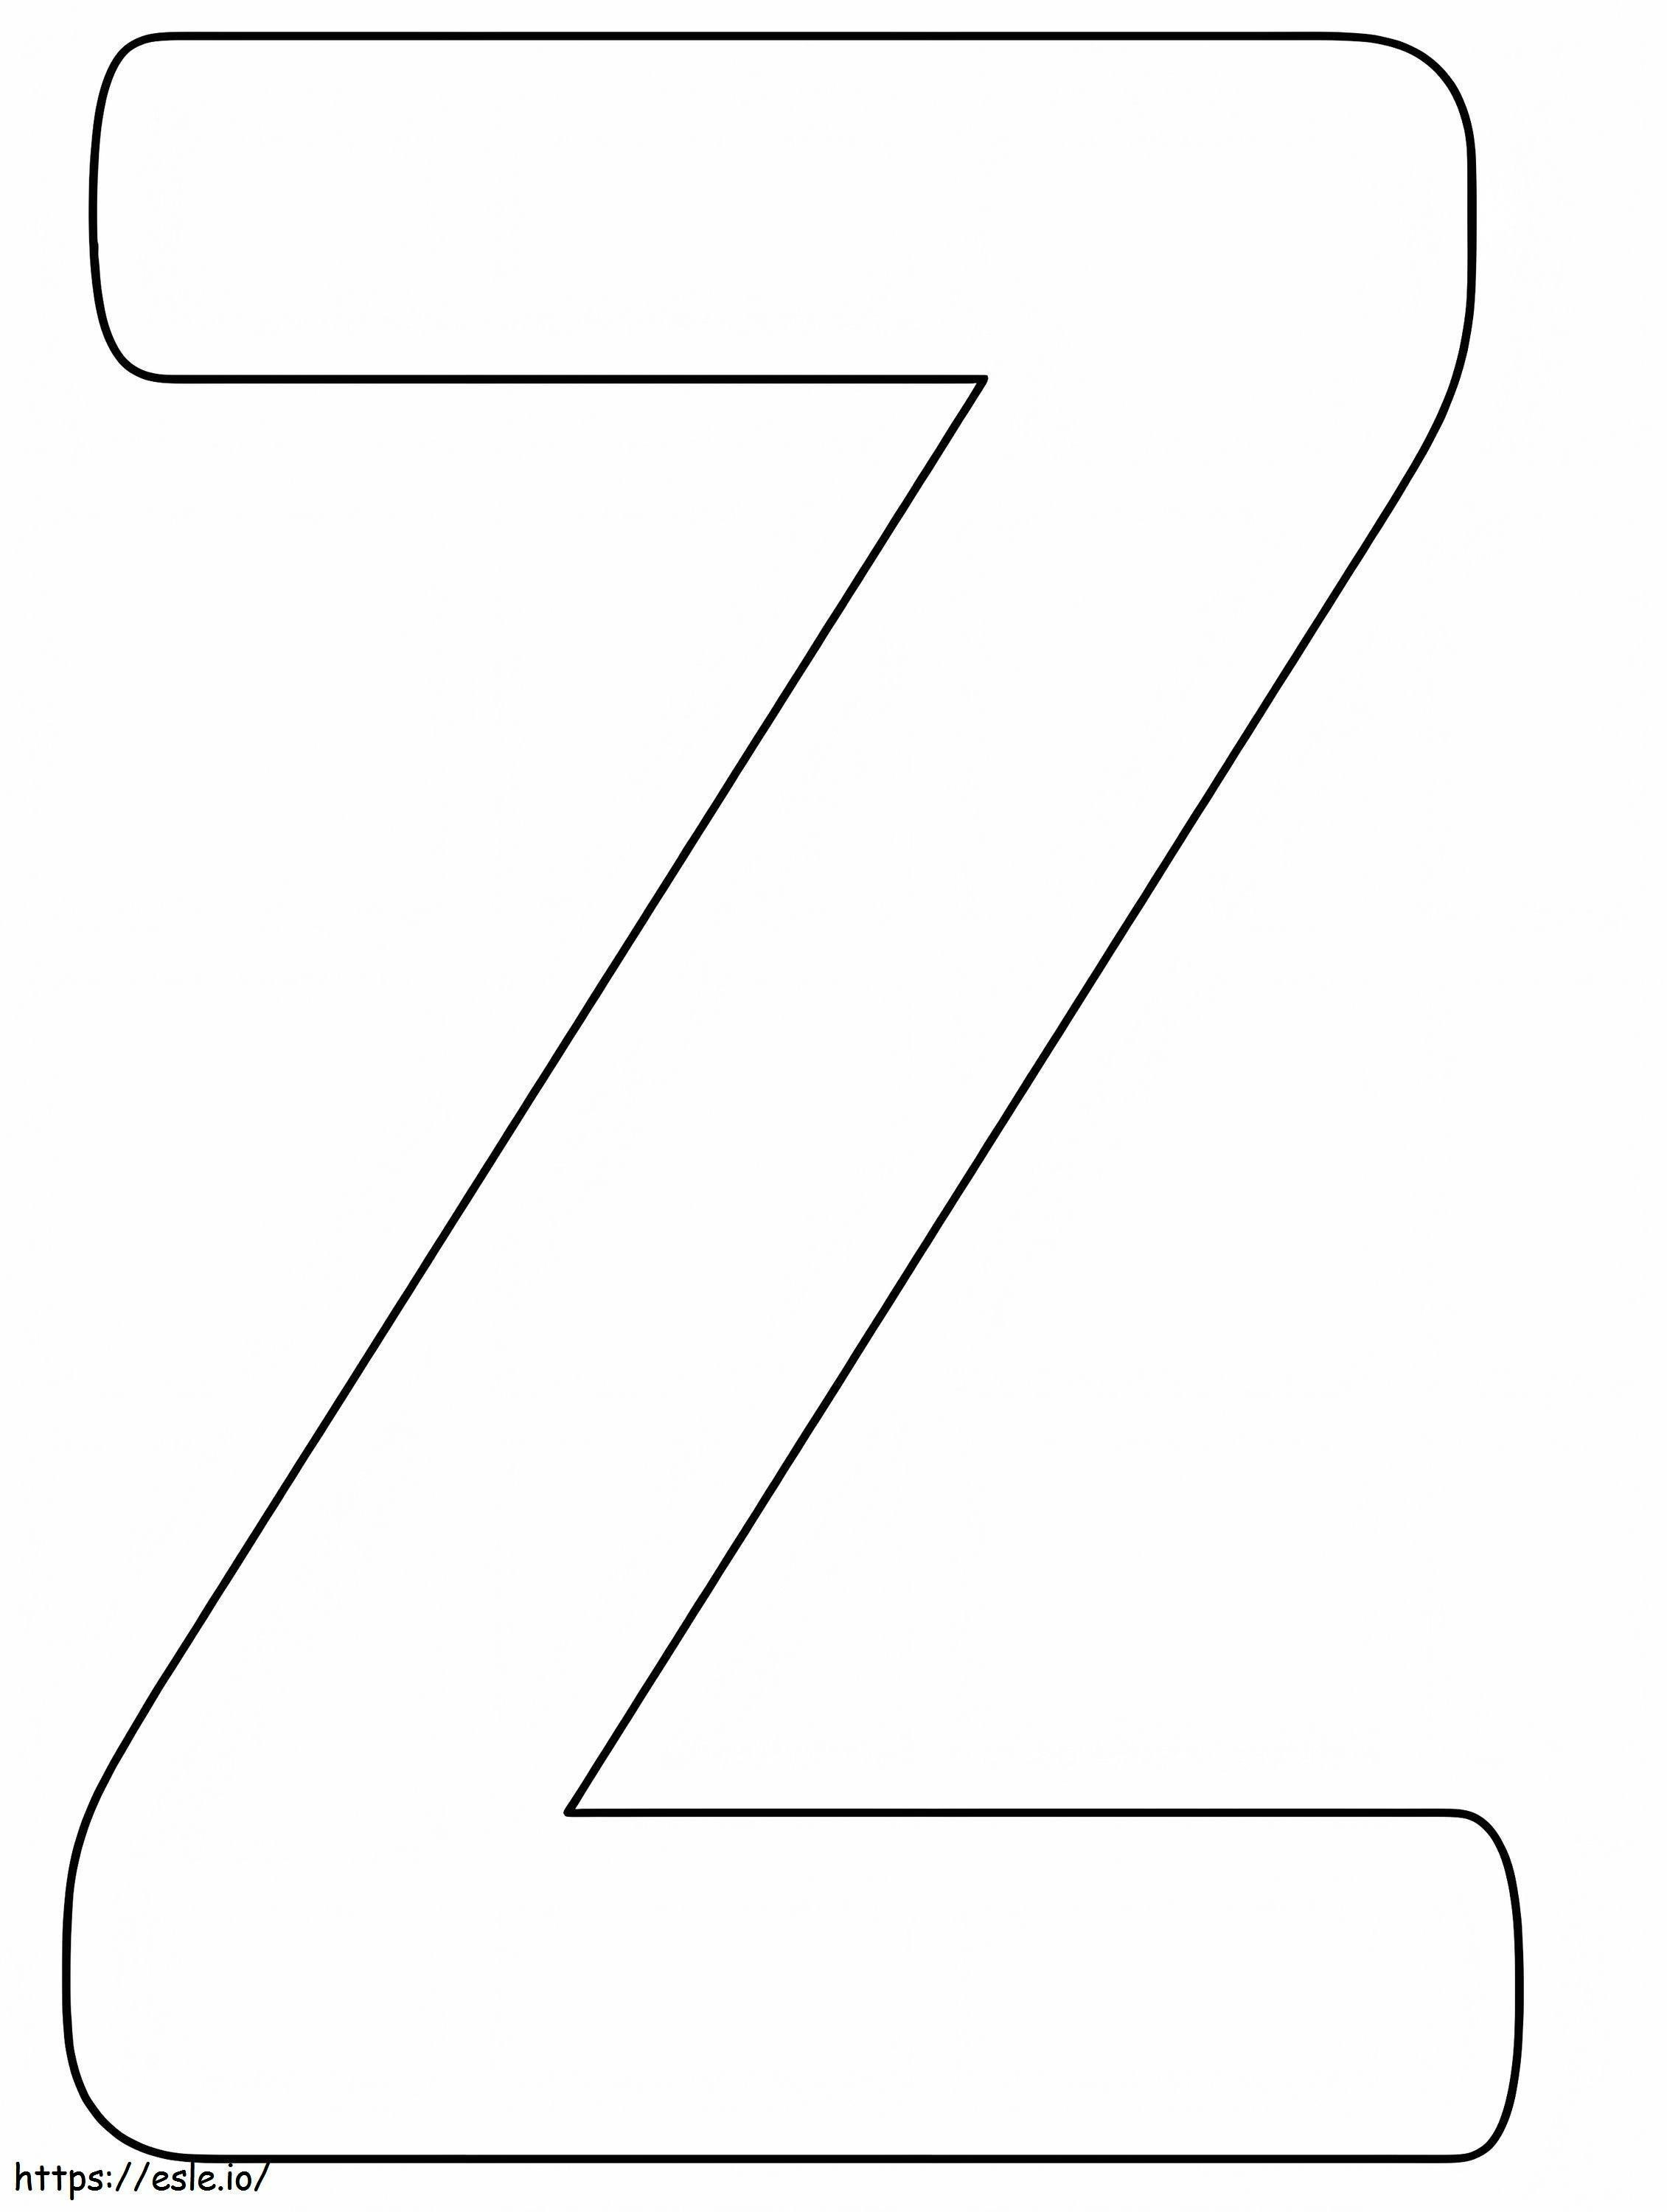 Basic Letter Z coloring page